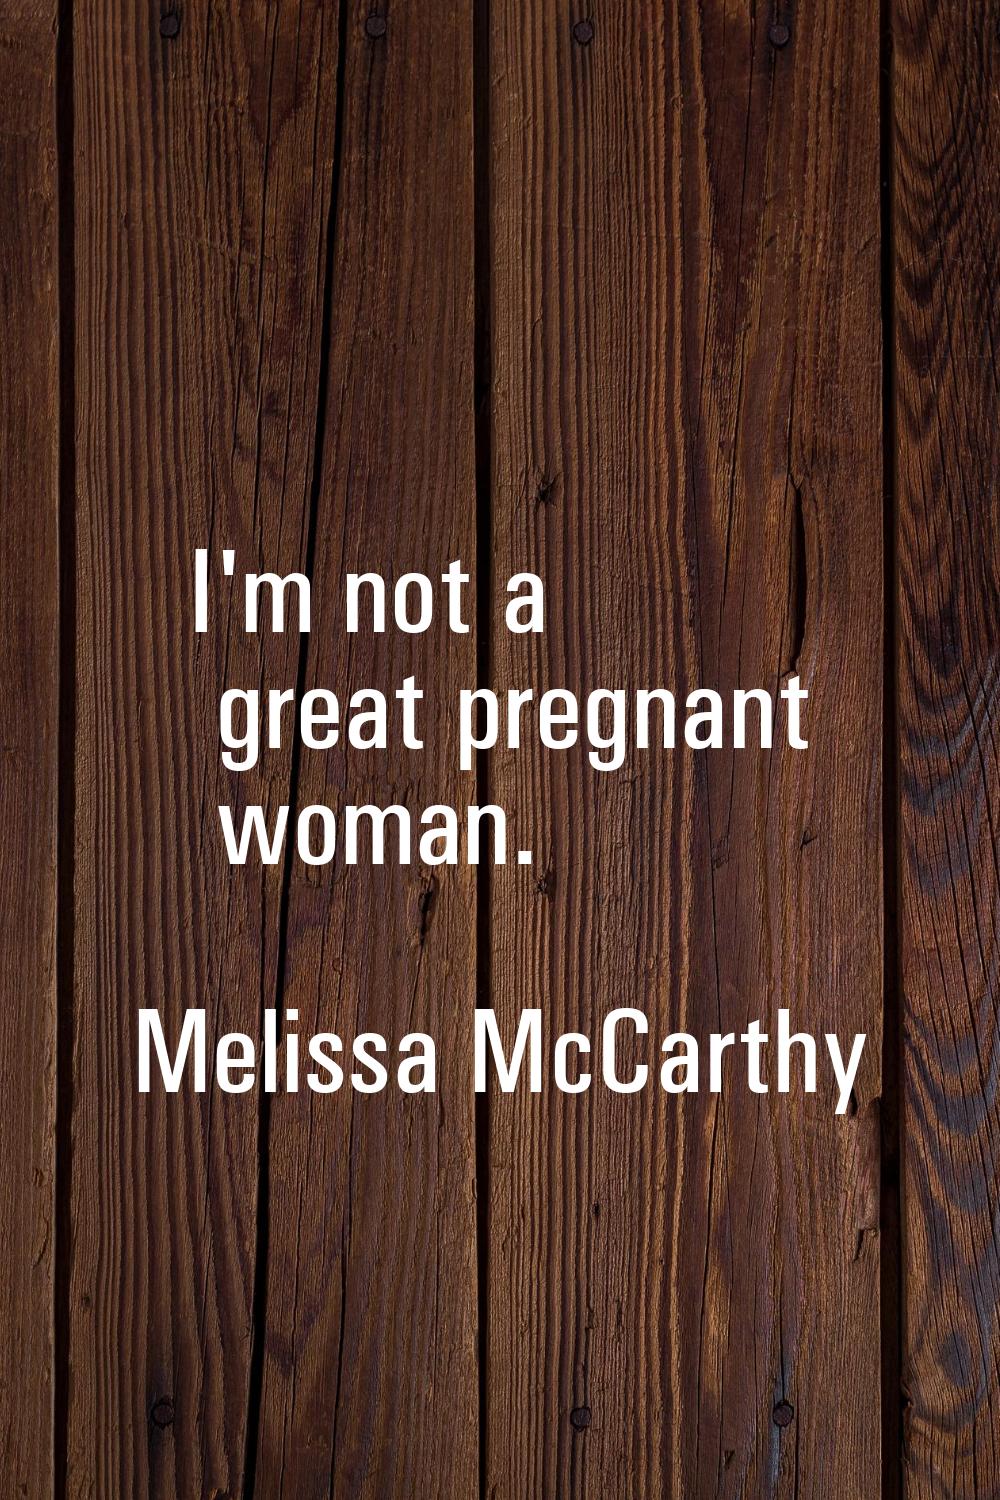 I'm not a great pregnant woman.